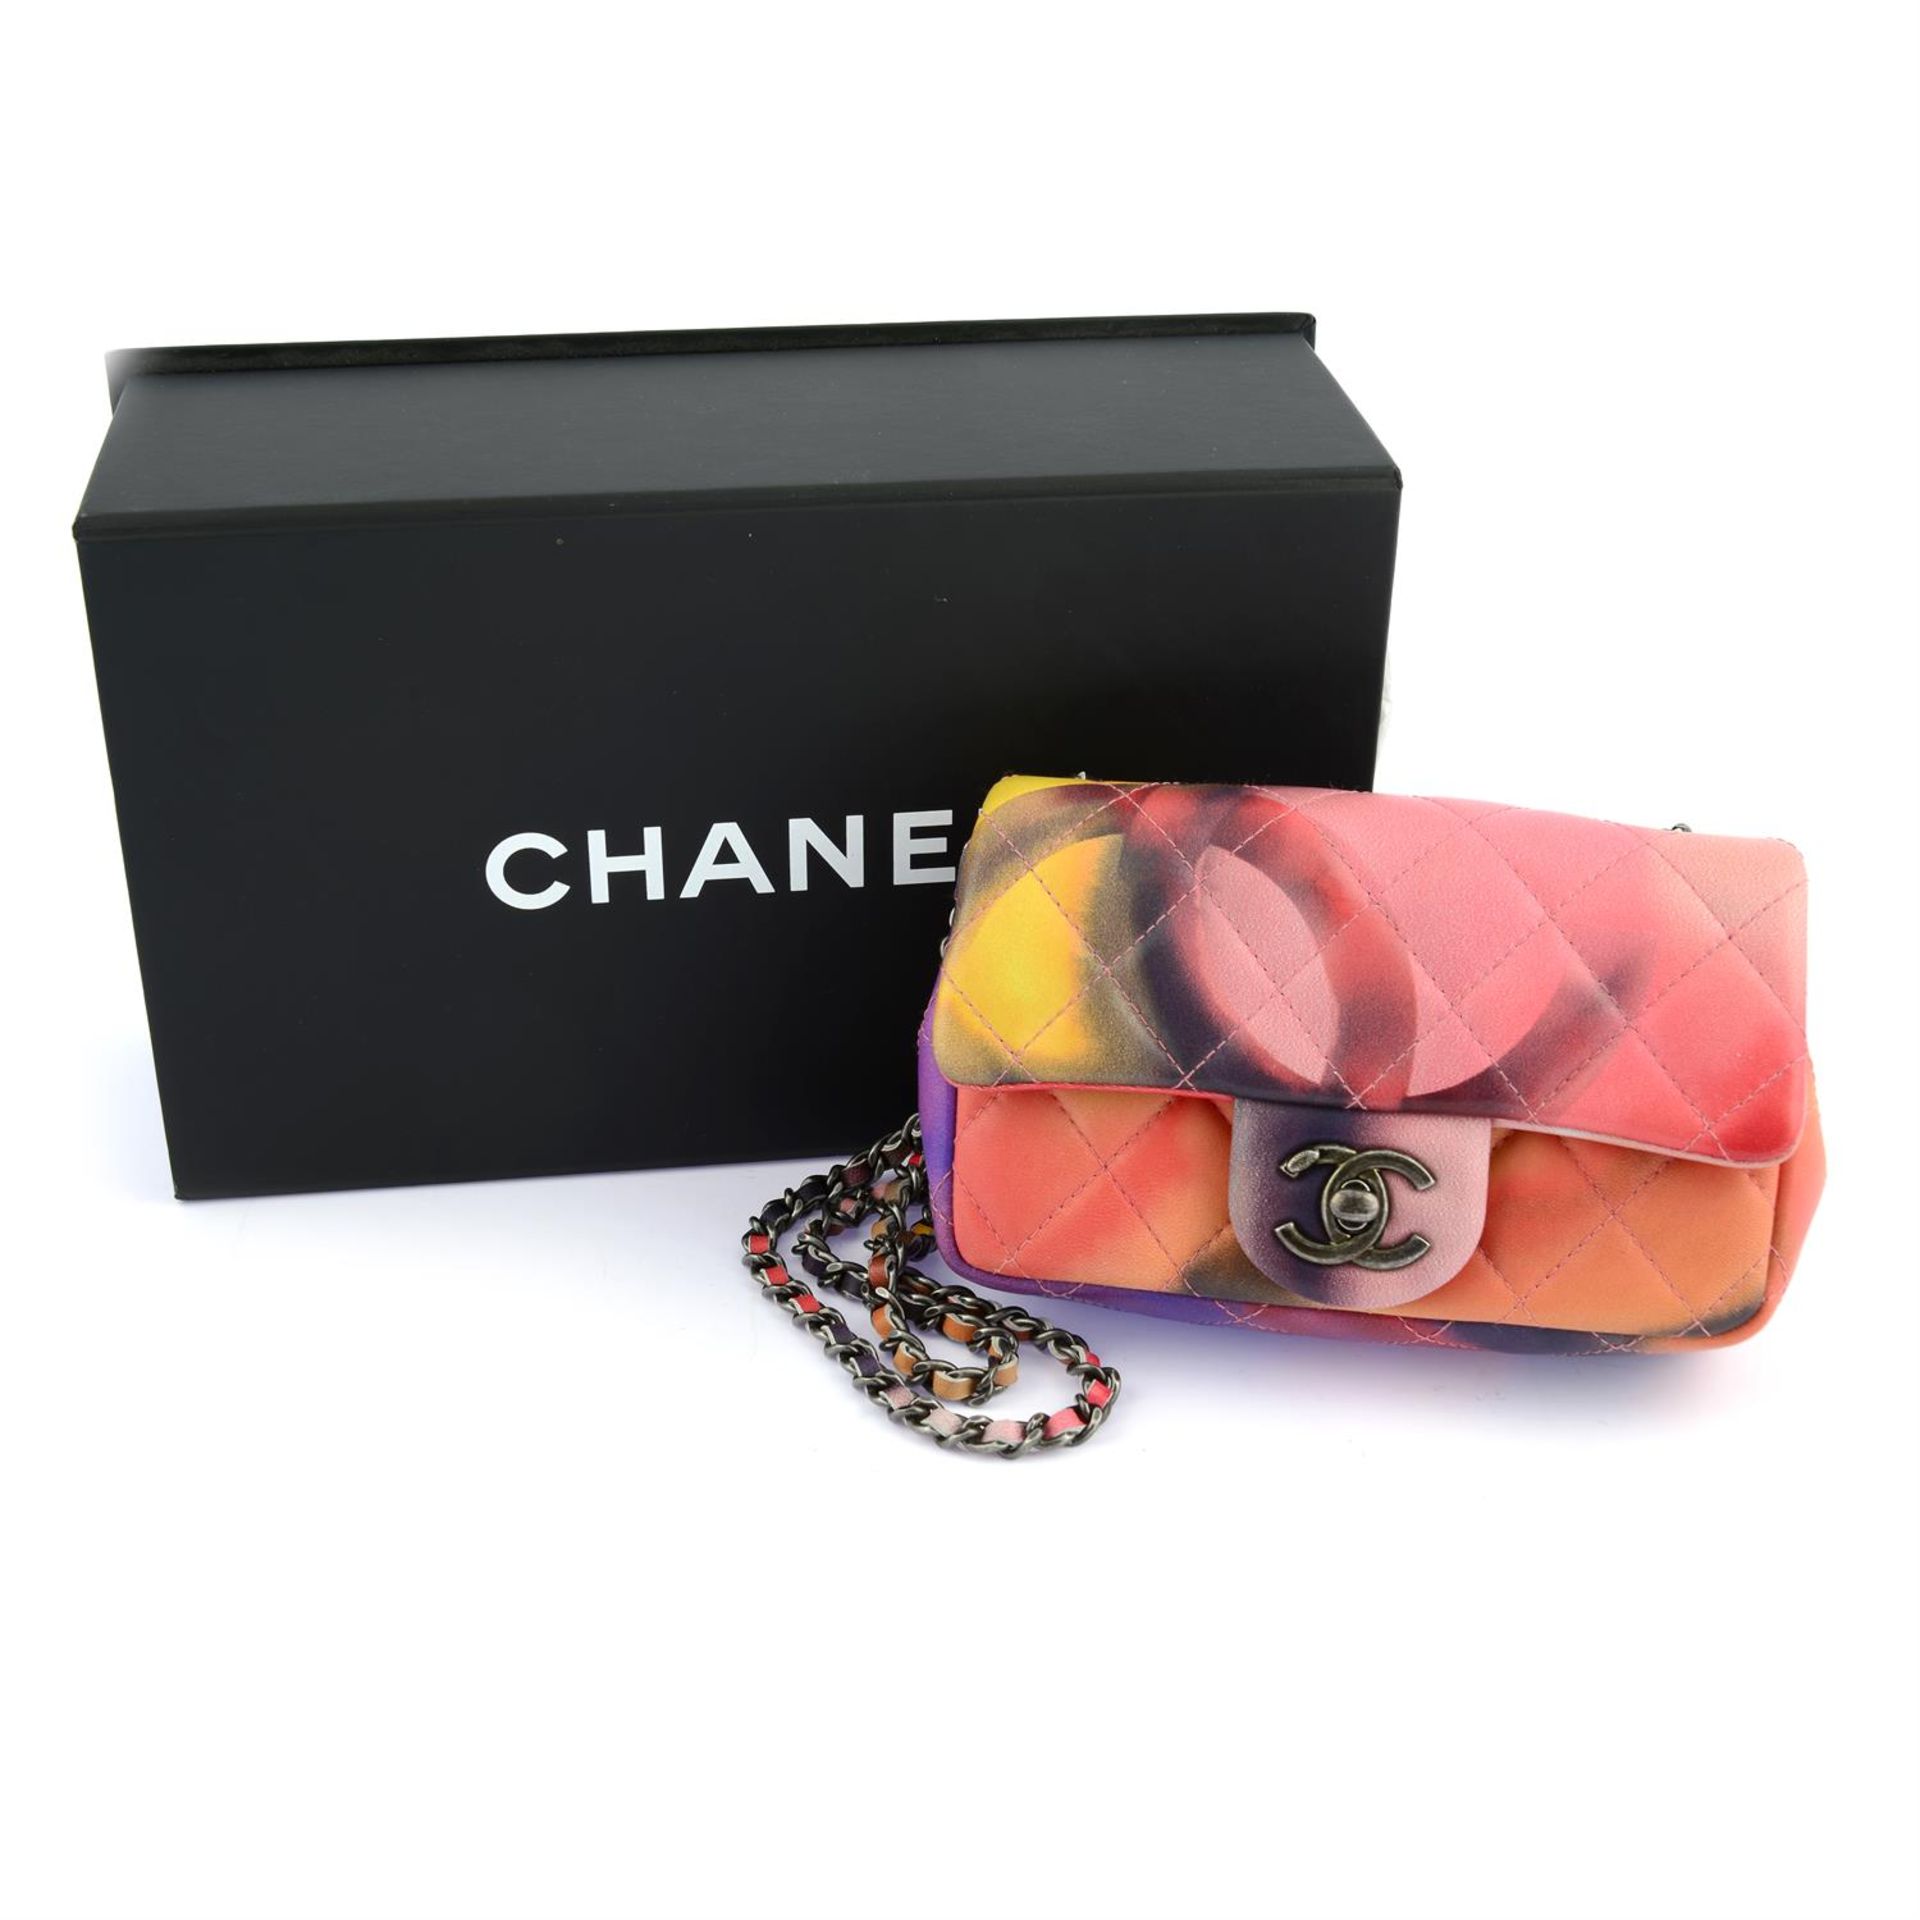 CHANEL - a 2015 Flower Power Extra mini flap bag. - Image 5 of 5